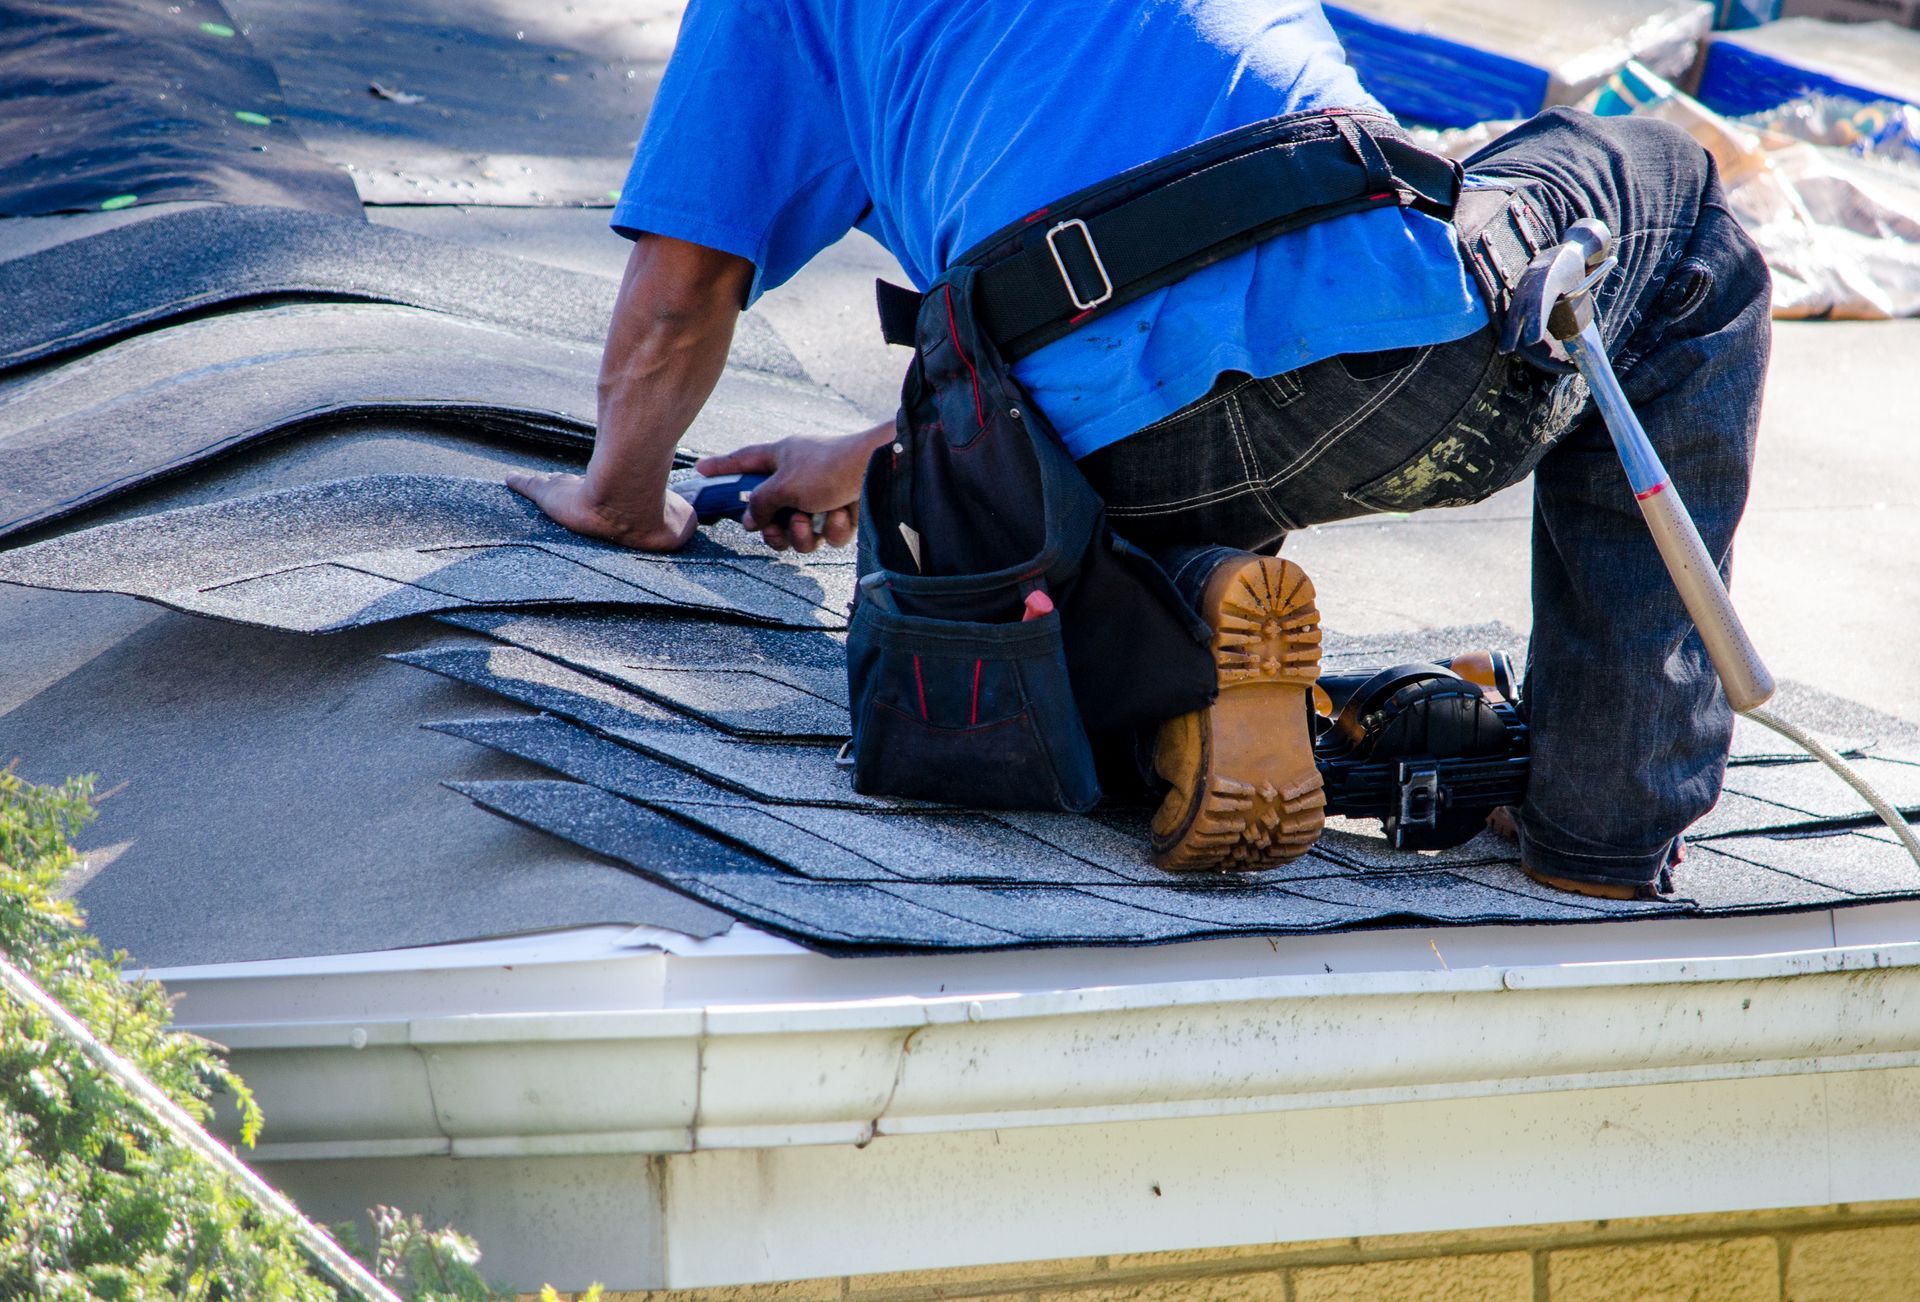 A man is working on the roof of a house.